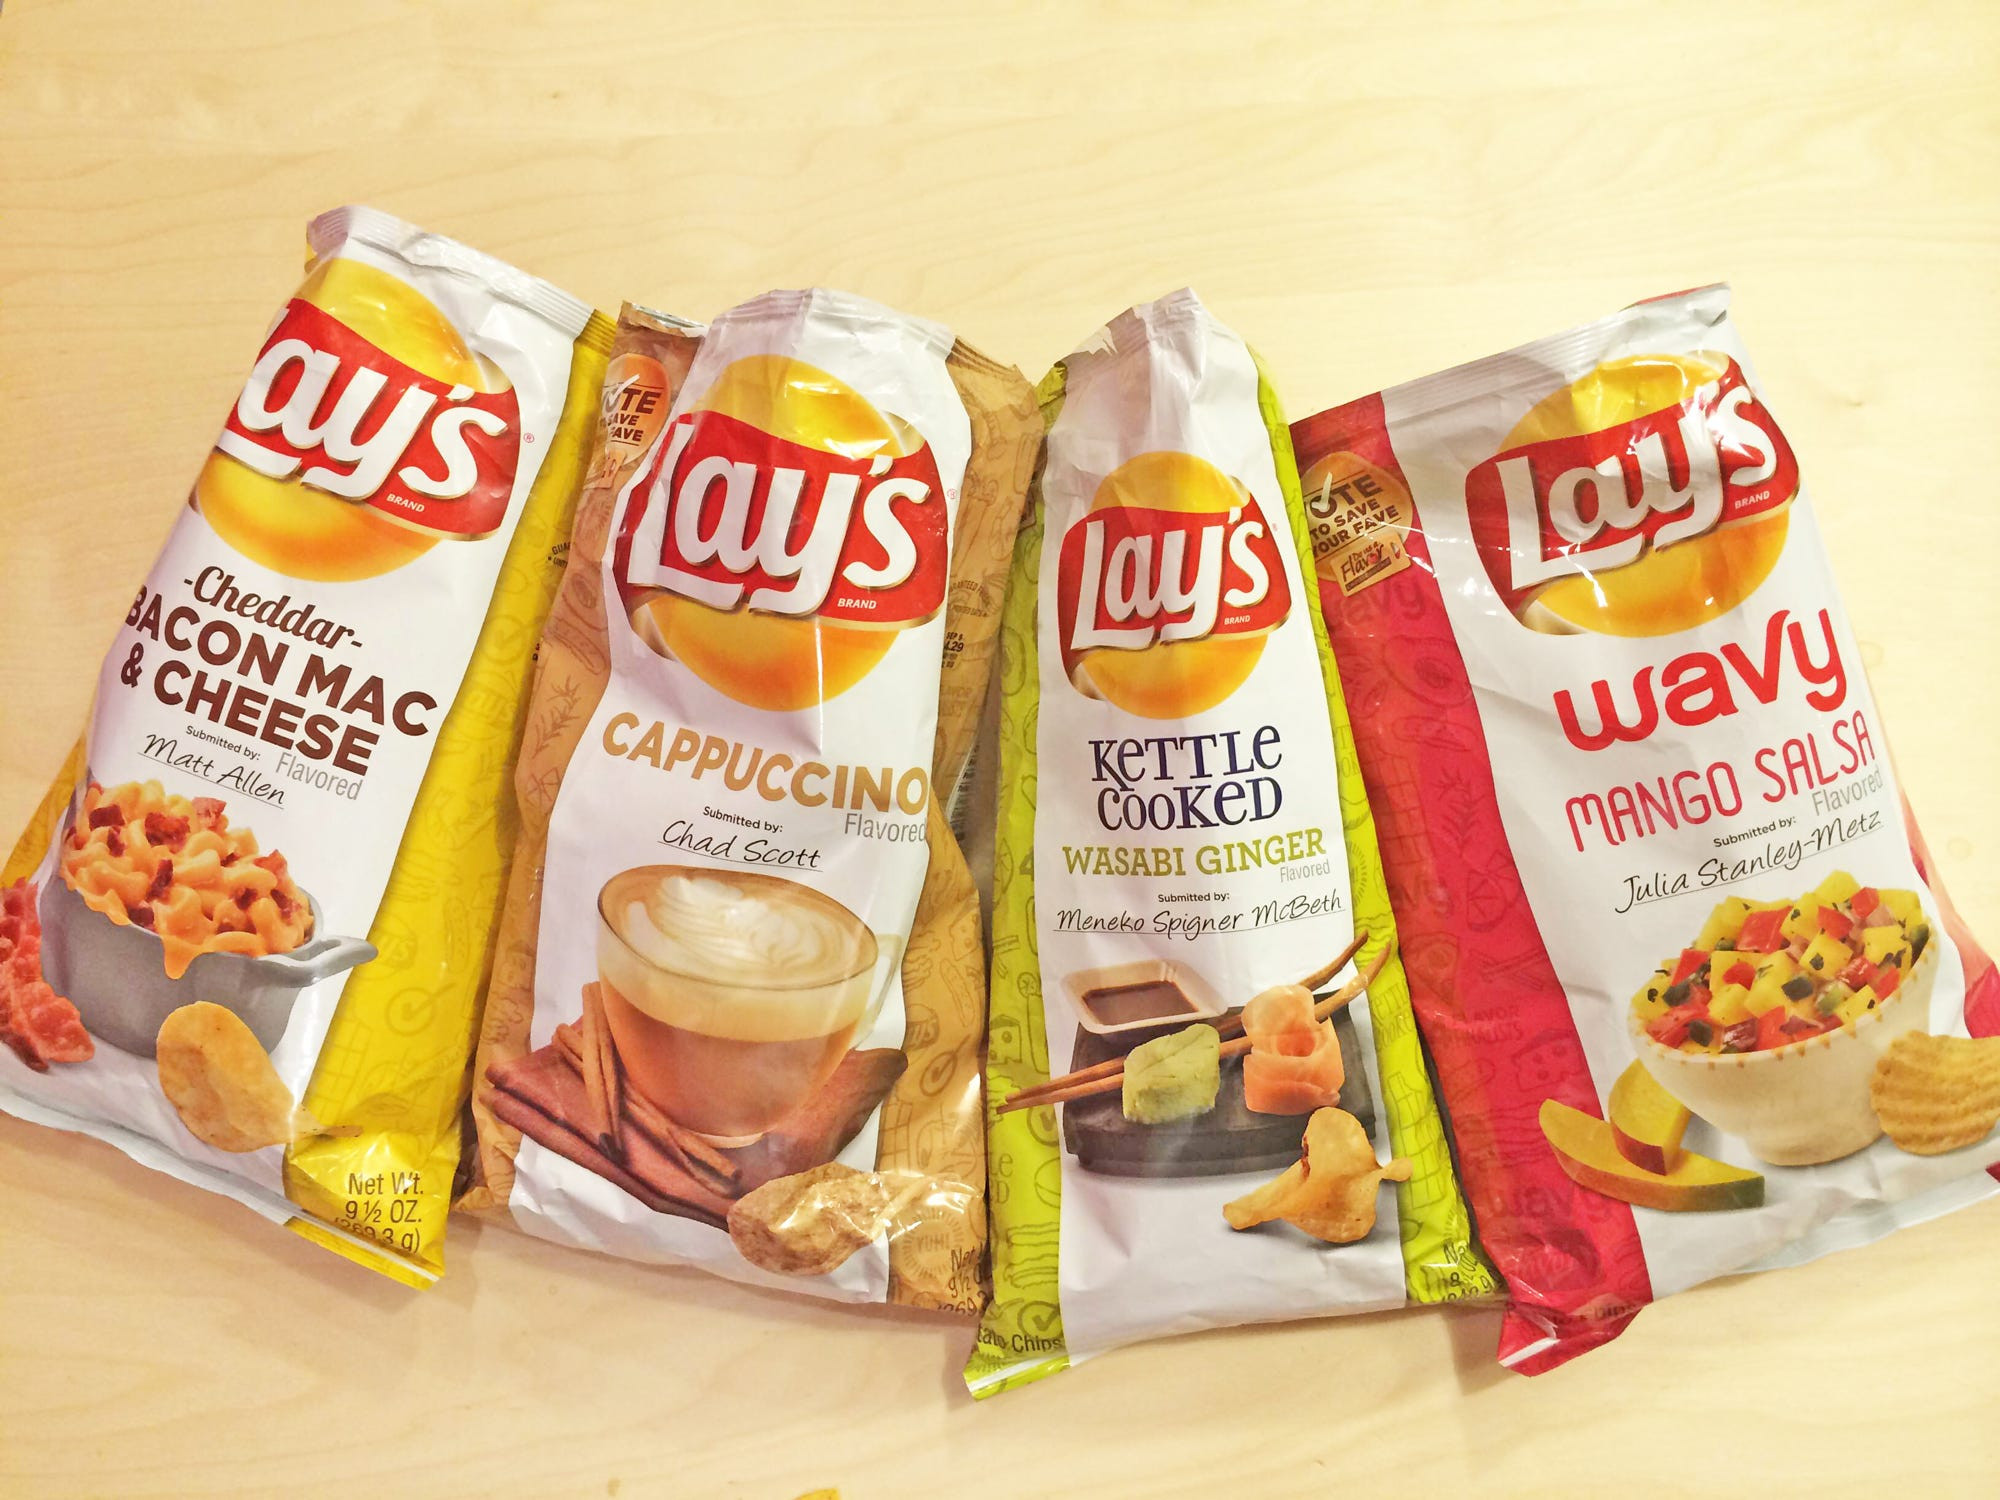 Lays Potato Chips Flavors
 We Tried The 4 New Lay s Potato Chip Flavours Here s